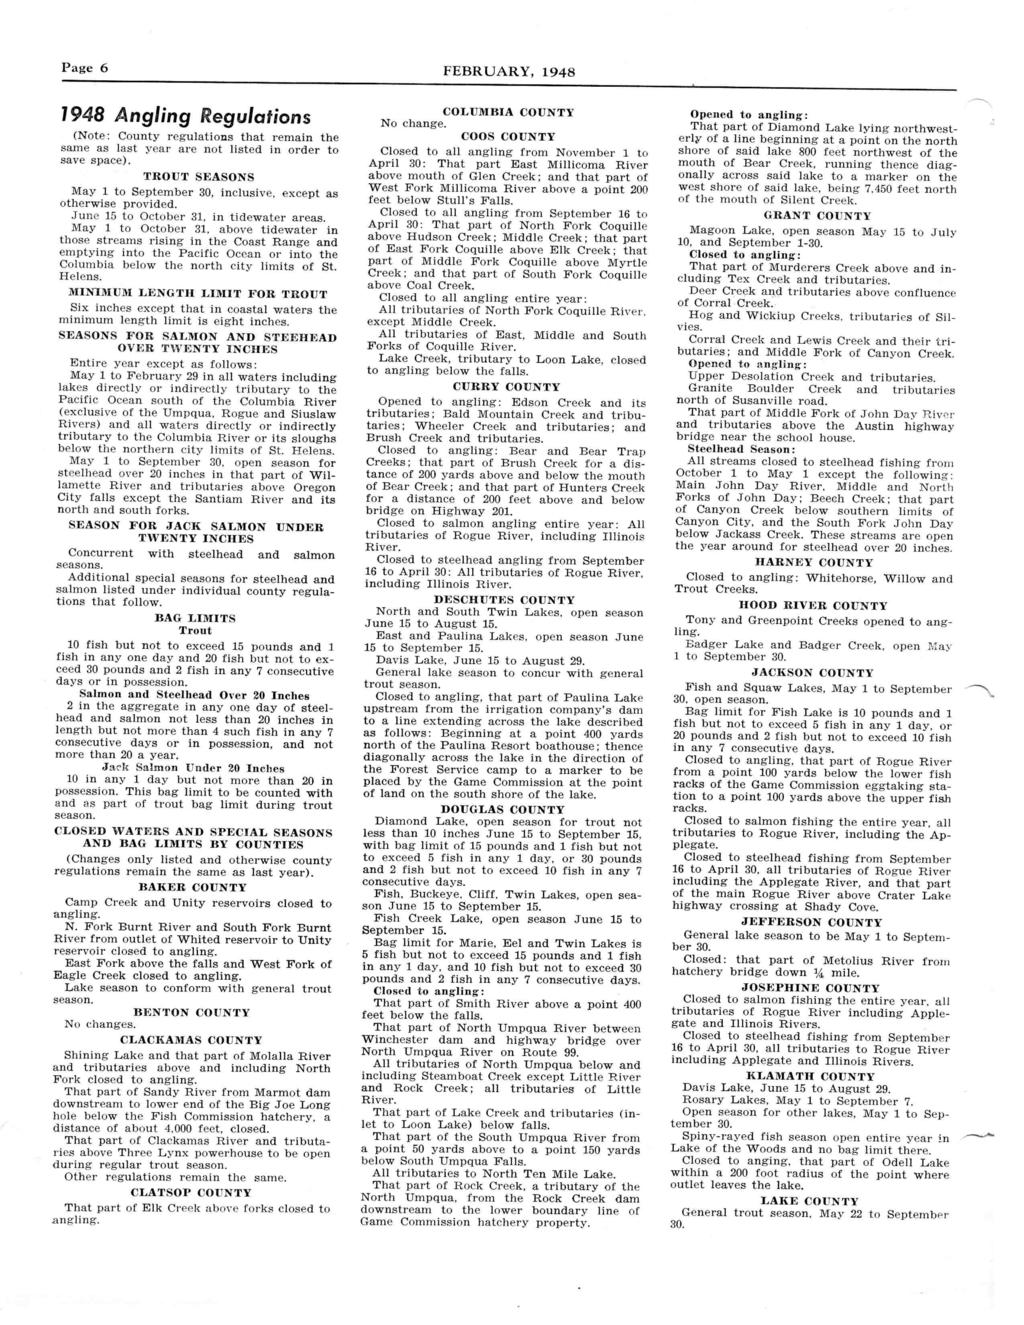 Page 6 FEBRUARY, 1948 1948 Angling Regulations (Note: County regulations that remain the same as last year are not listed in order to save space).